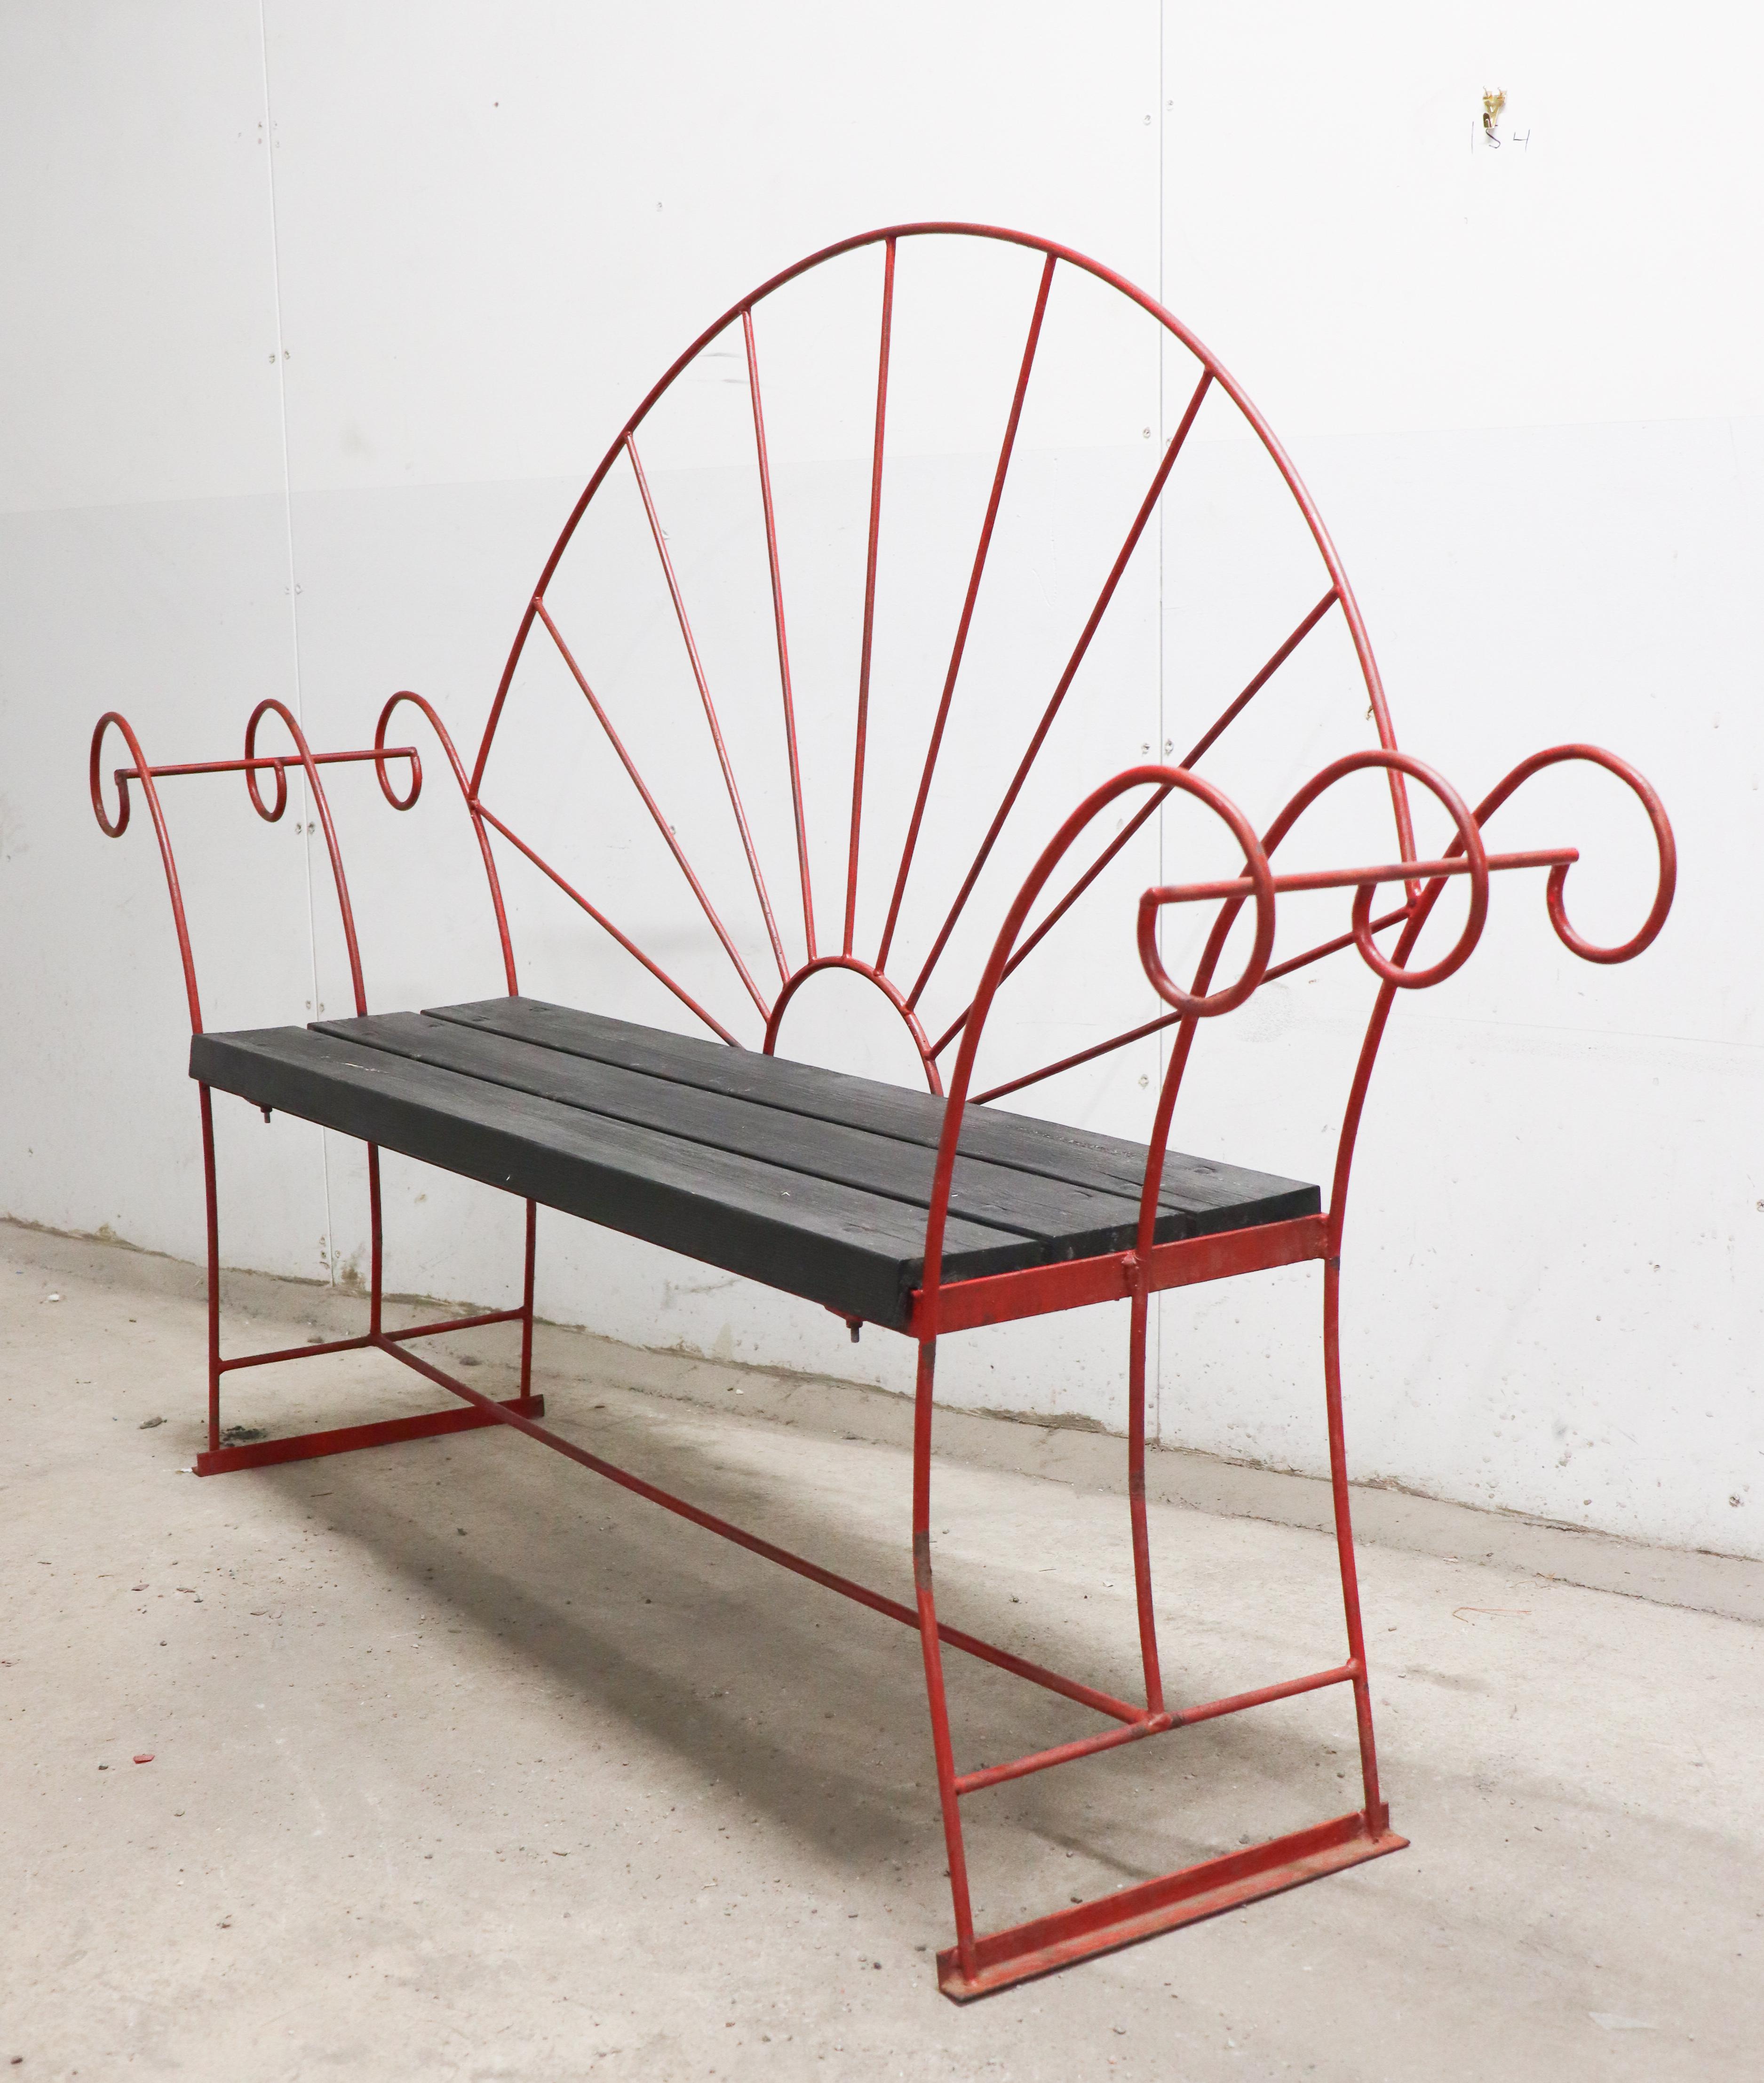 A Red Garden Sofa - Wrought Iron & Wood - Sweden Early 20th Century  For Sale 3